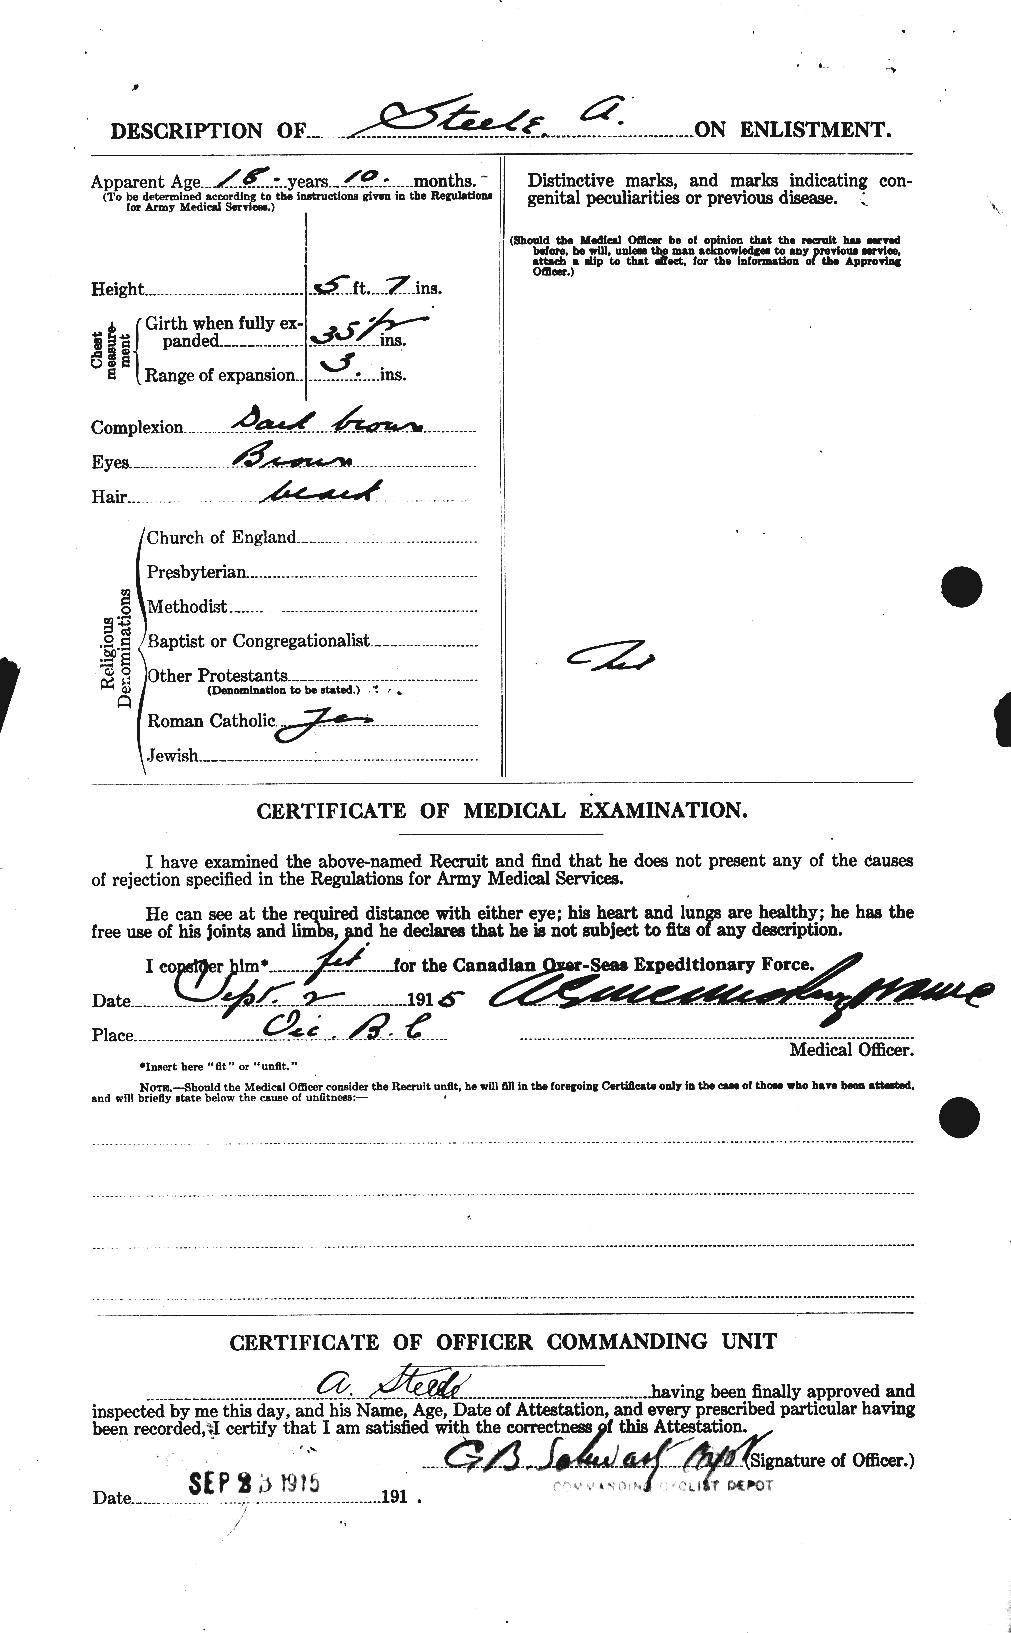 Personnel Records of the First World War - CEF 116240b